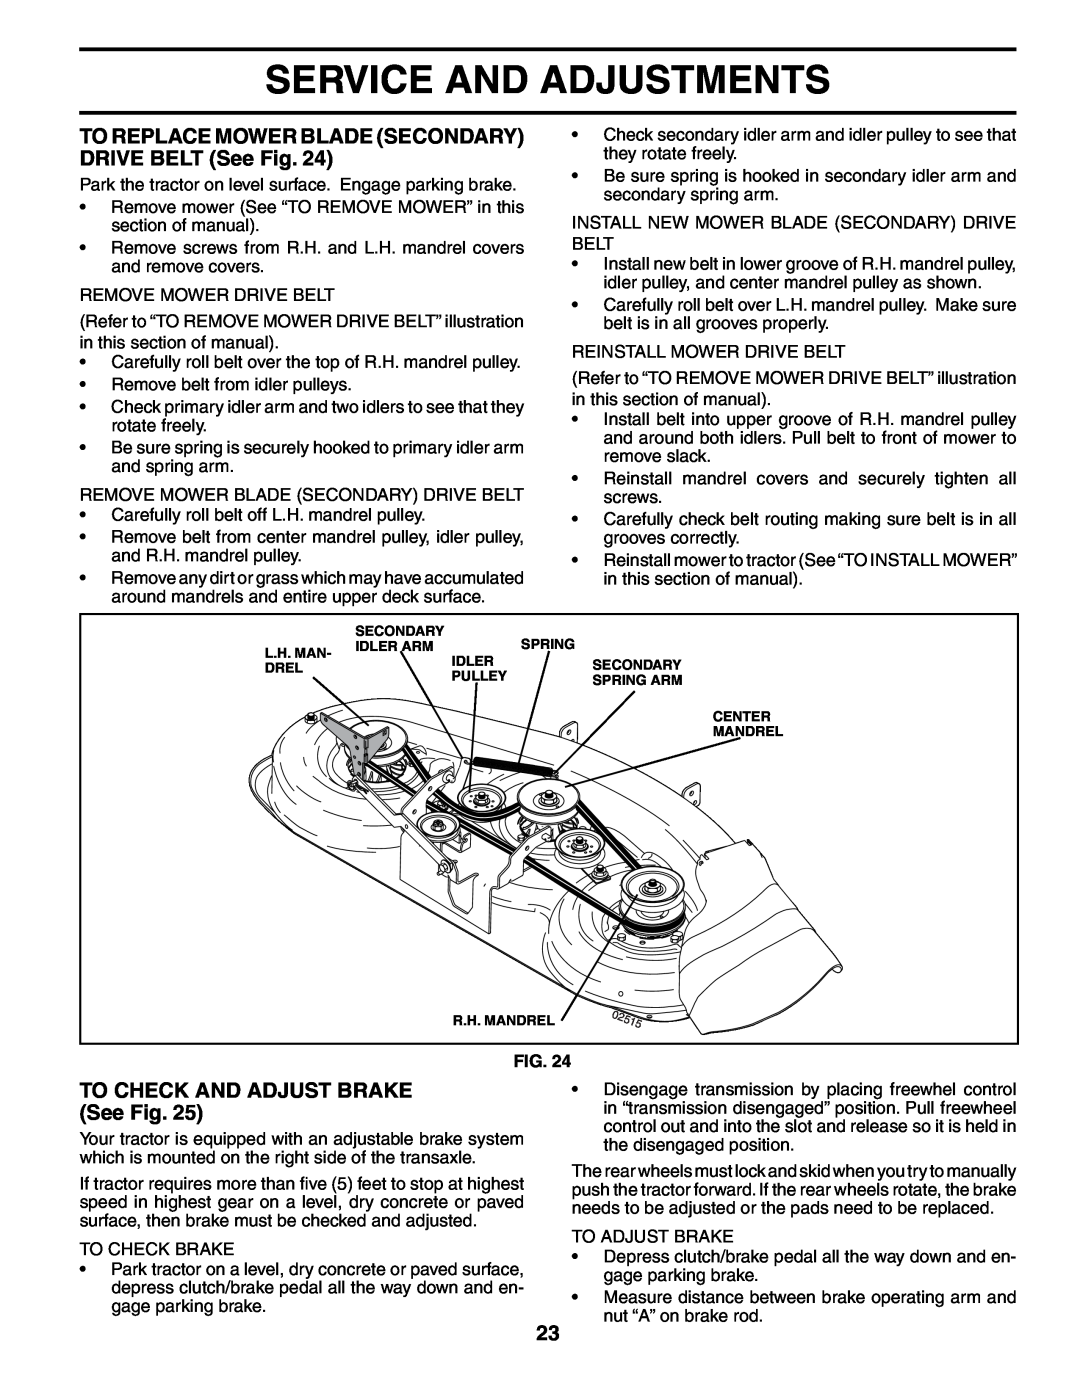 Poulan 195032 manual TO REPLACE MOWER BLADE SECONDARY DRIVE BELT See Fig, TO CHECK AND ADJUST BRAKE See Fig 